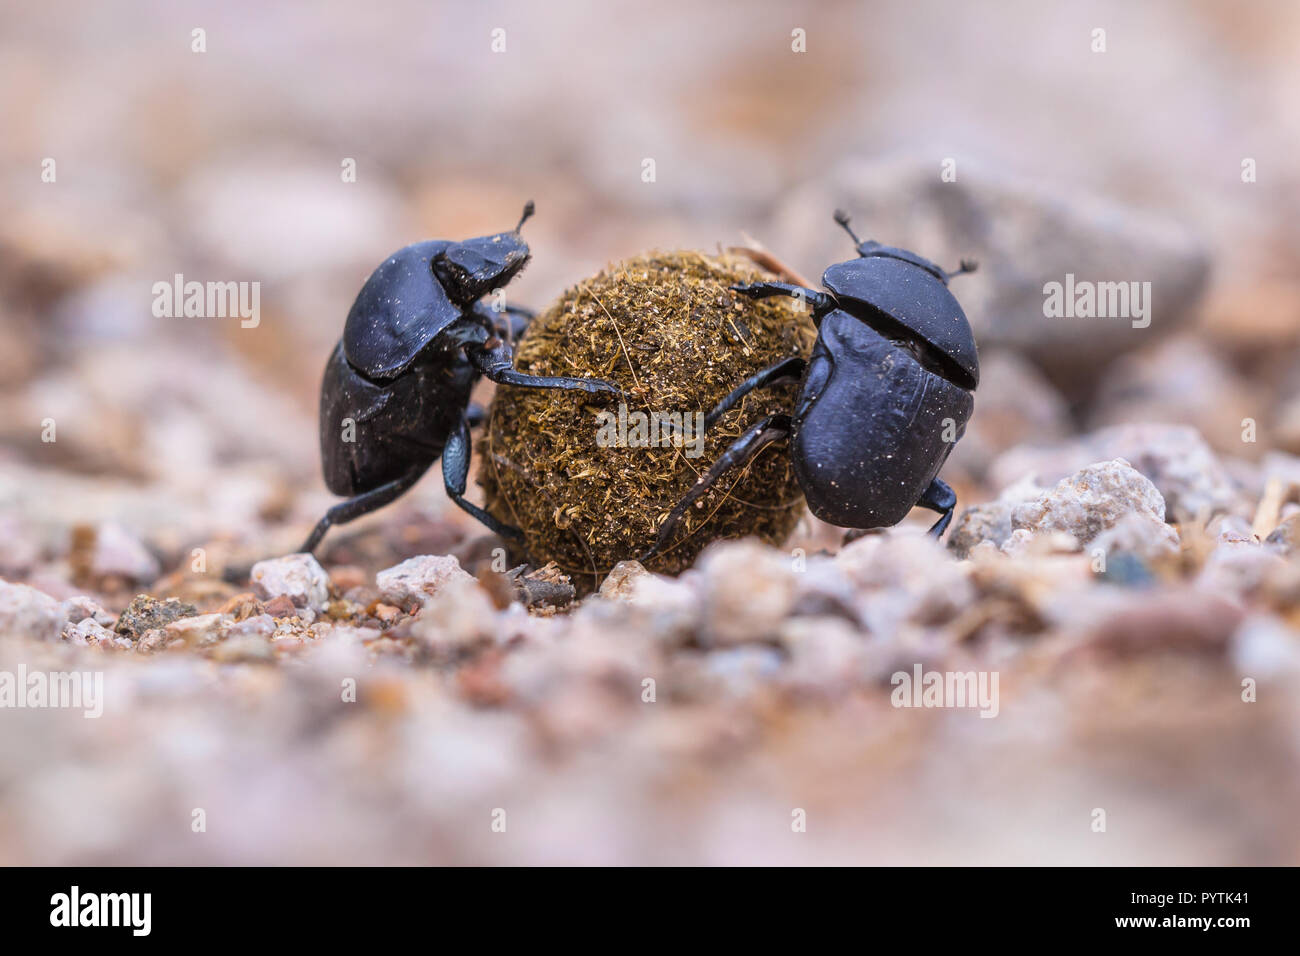 Two dung beetles drudging to roll a ball through gravel Stock Photo